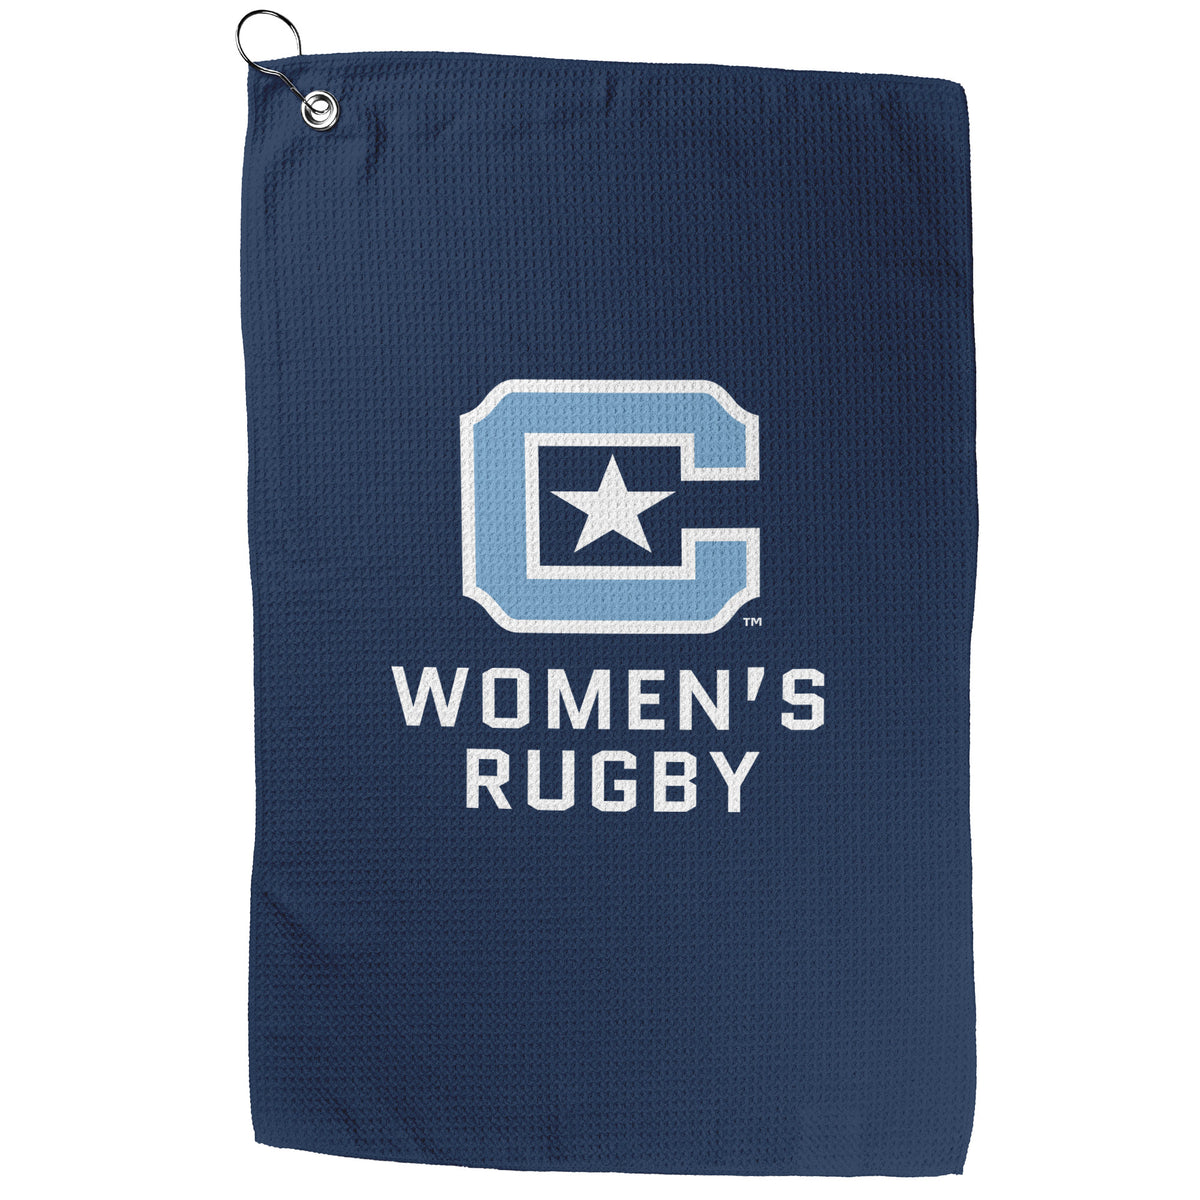 The Citadel, Club Sports Women's Rugby, Double Sided Golf Towel